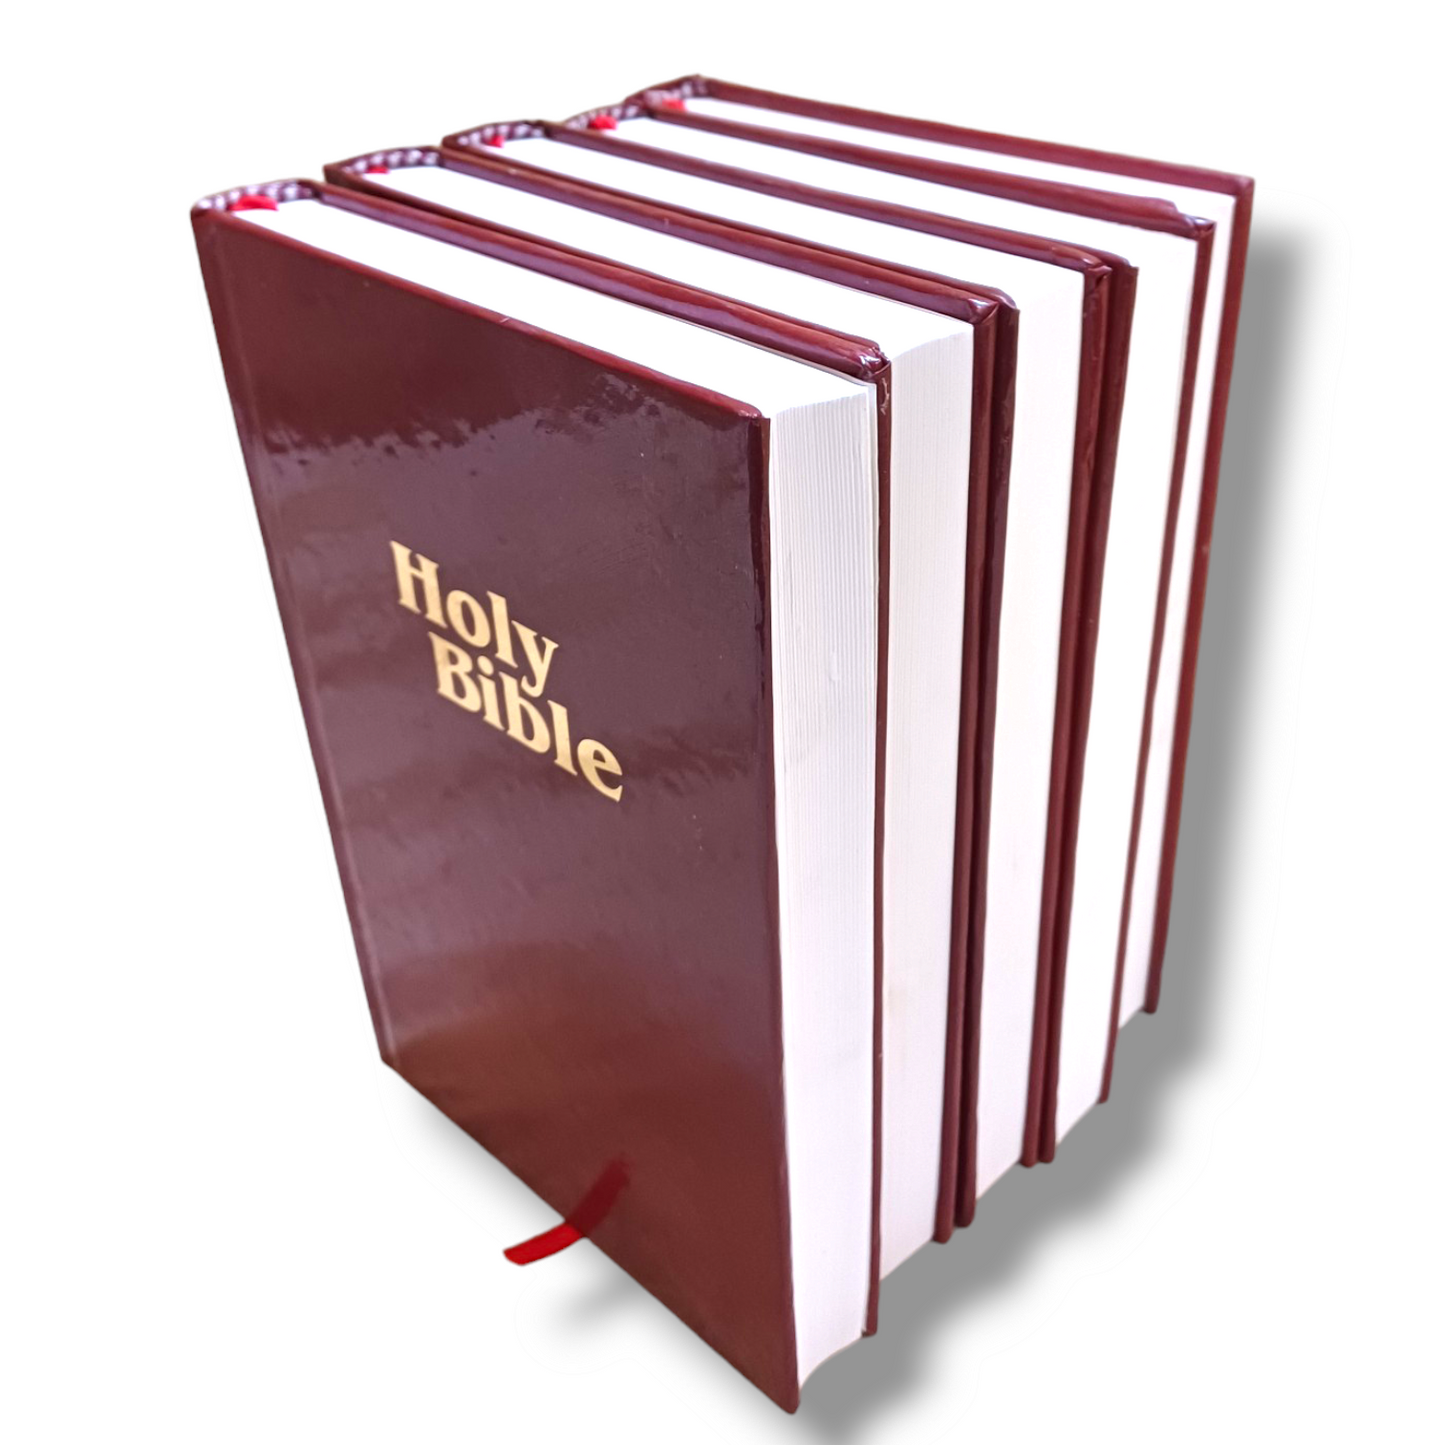 NKJV Holy Bible | Dictionary Concordance Bible | Pack Of Five ( 5 ) Hard Bound Edition | In Red Color Bound | New Edition